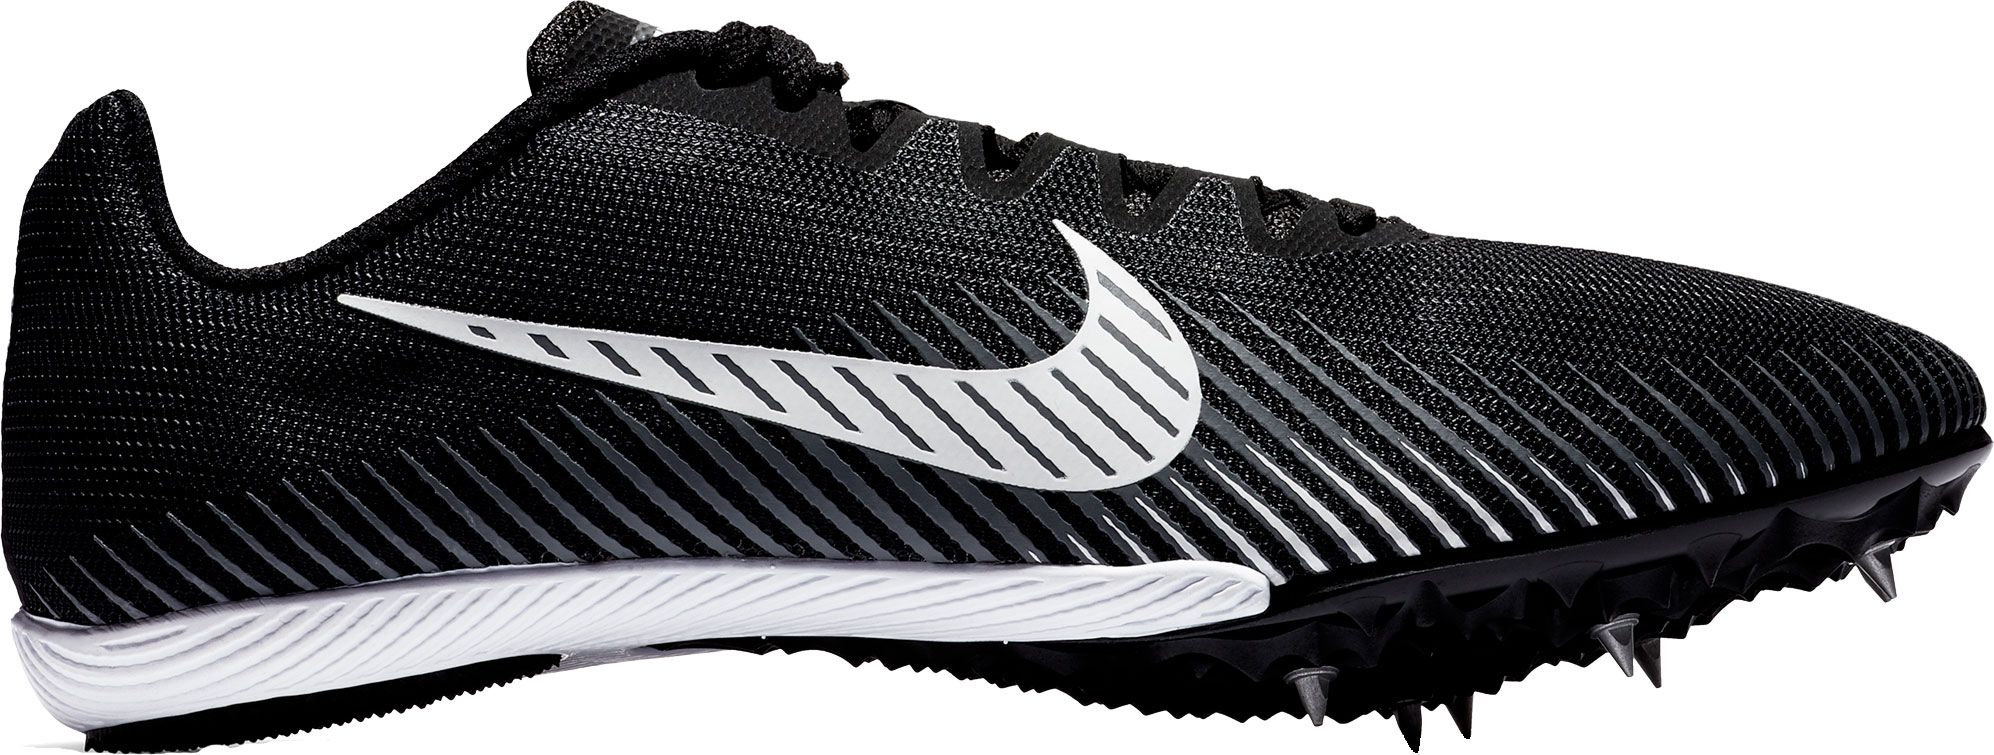 track and field distance spikes